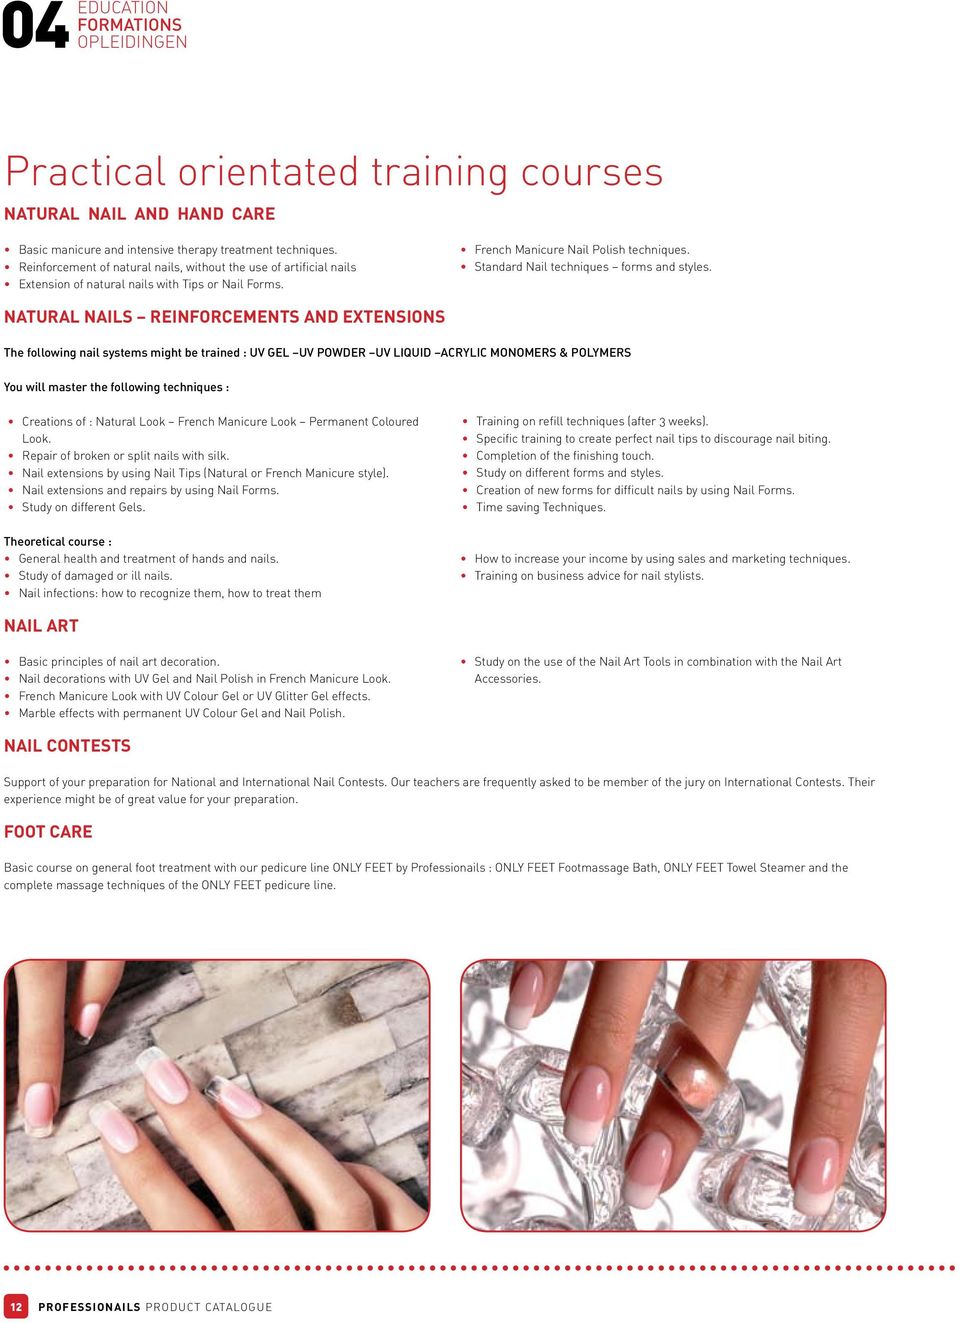 Standard Nail techniques forms and styles.